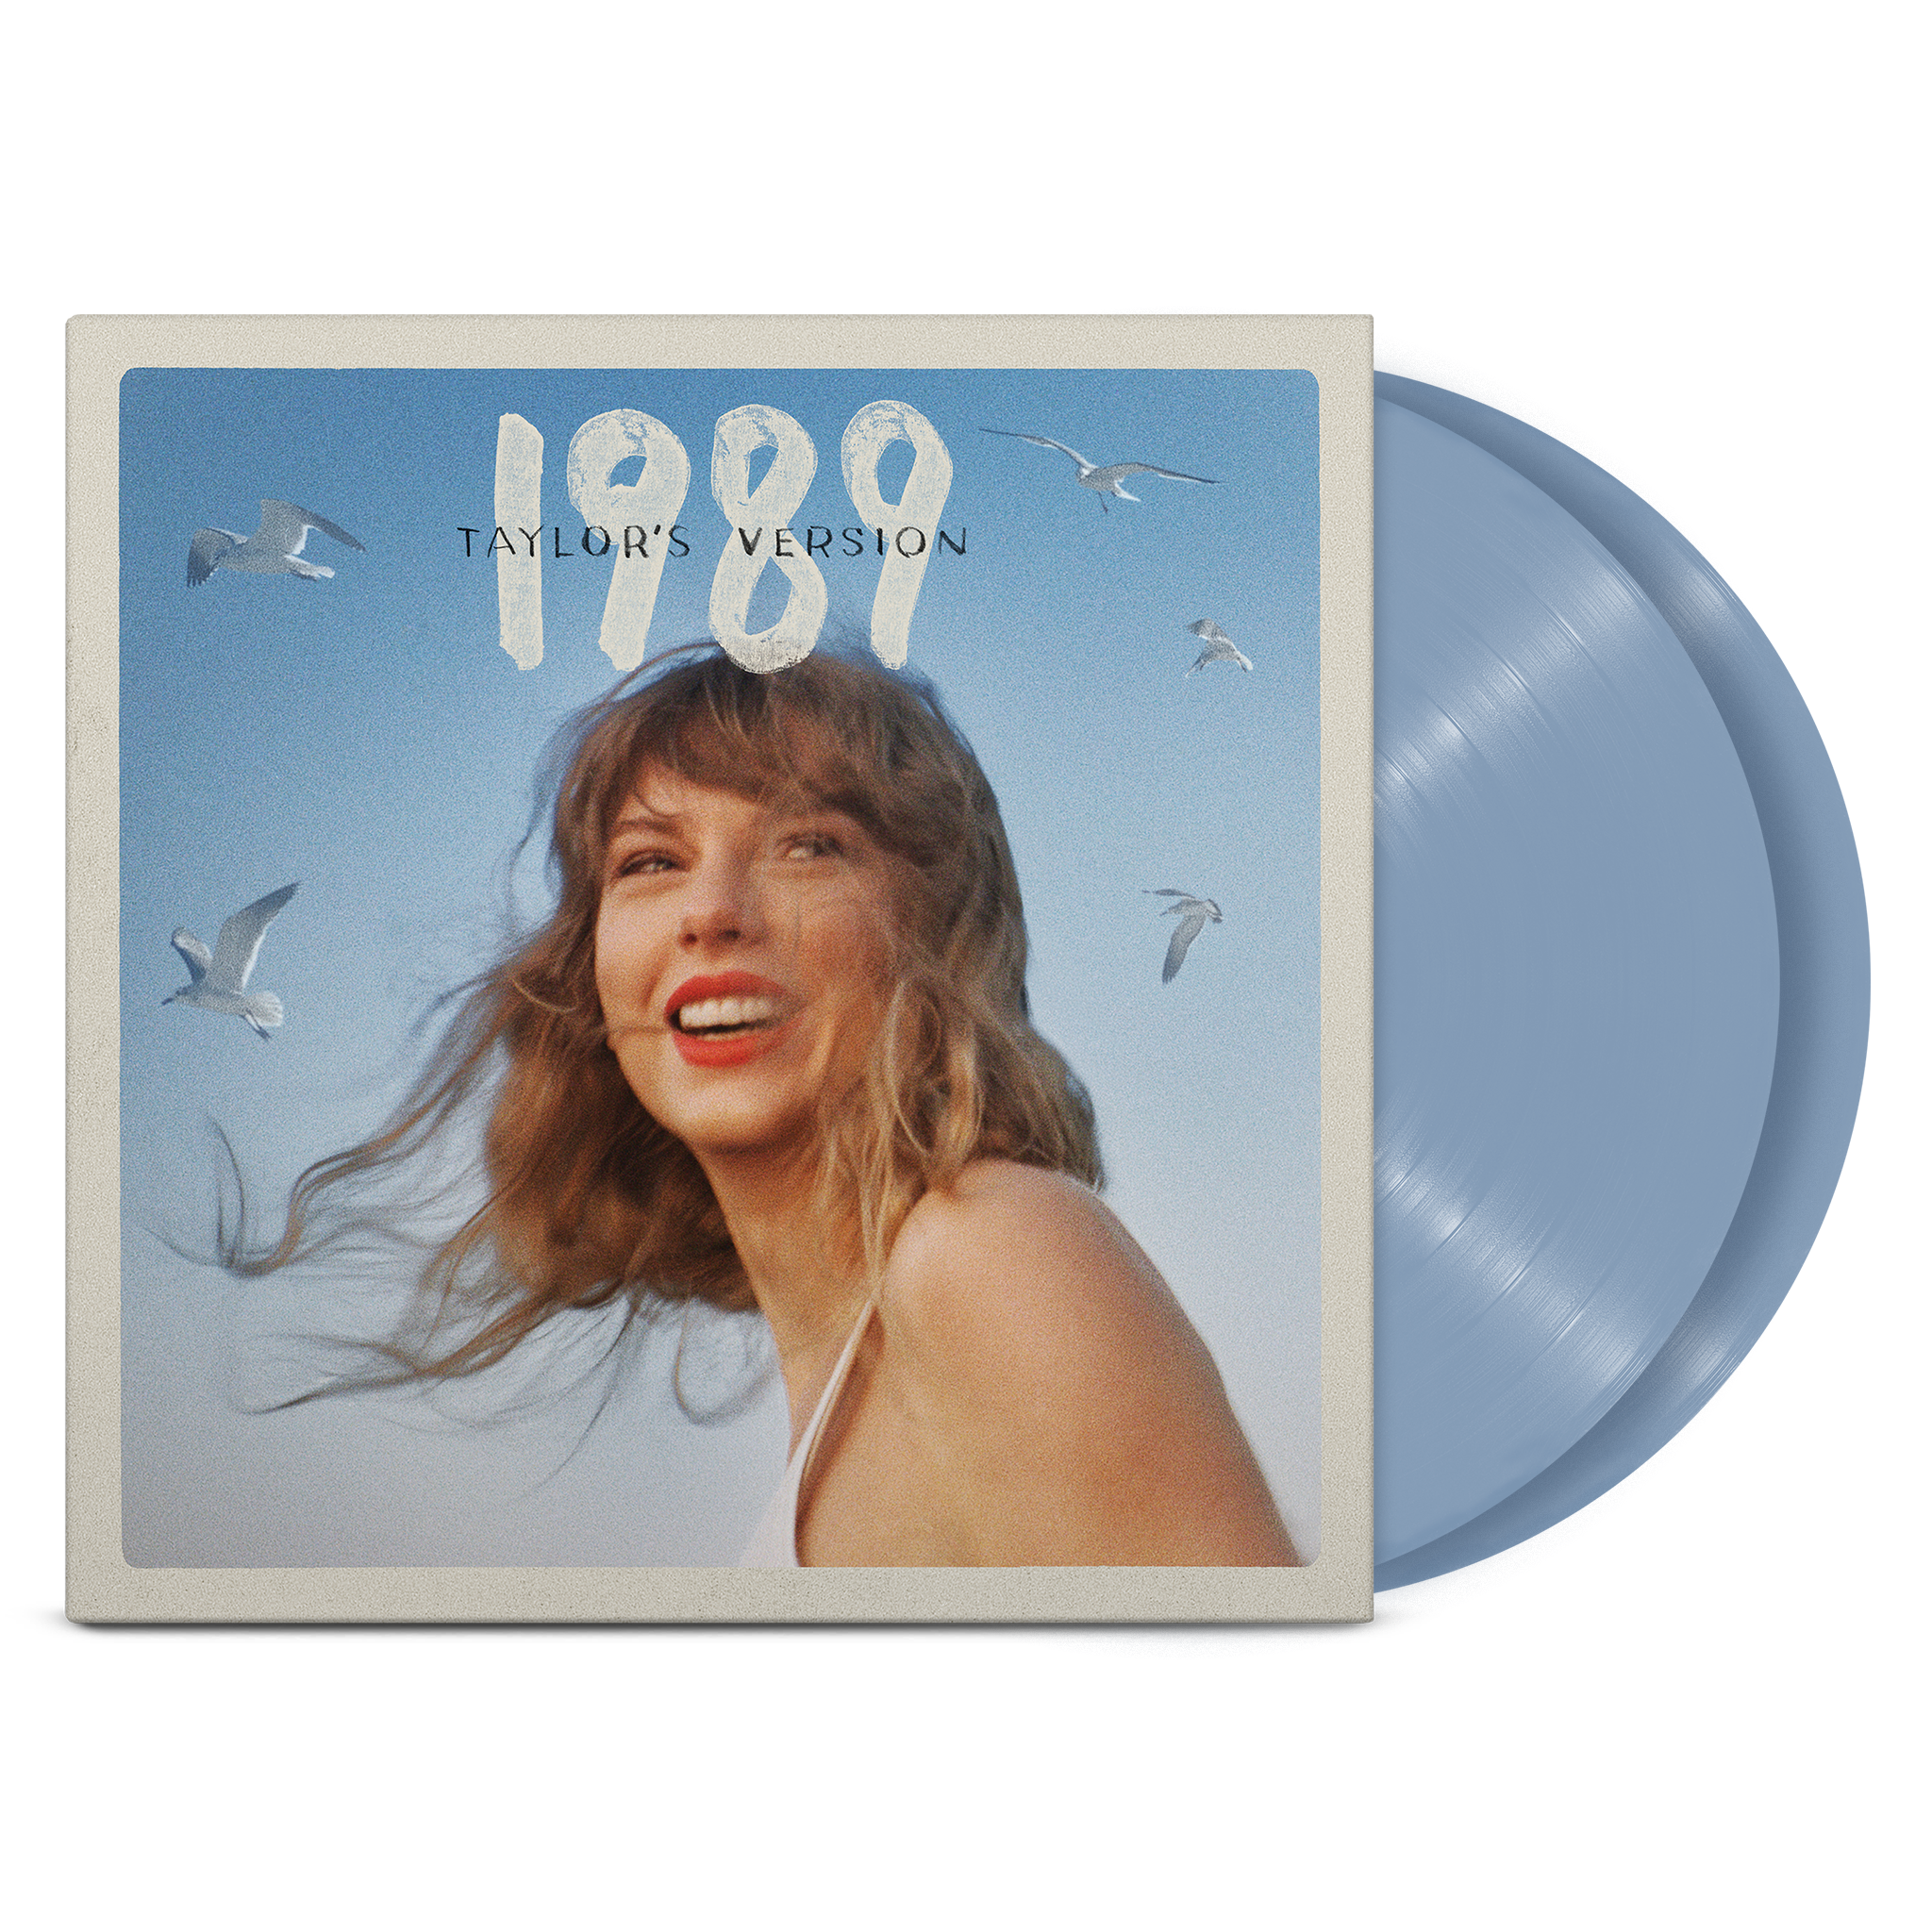 1989 (Taylor's Version) Shop - Taylor Swift Official Store